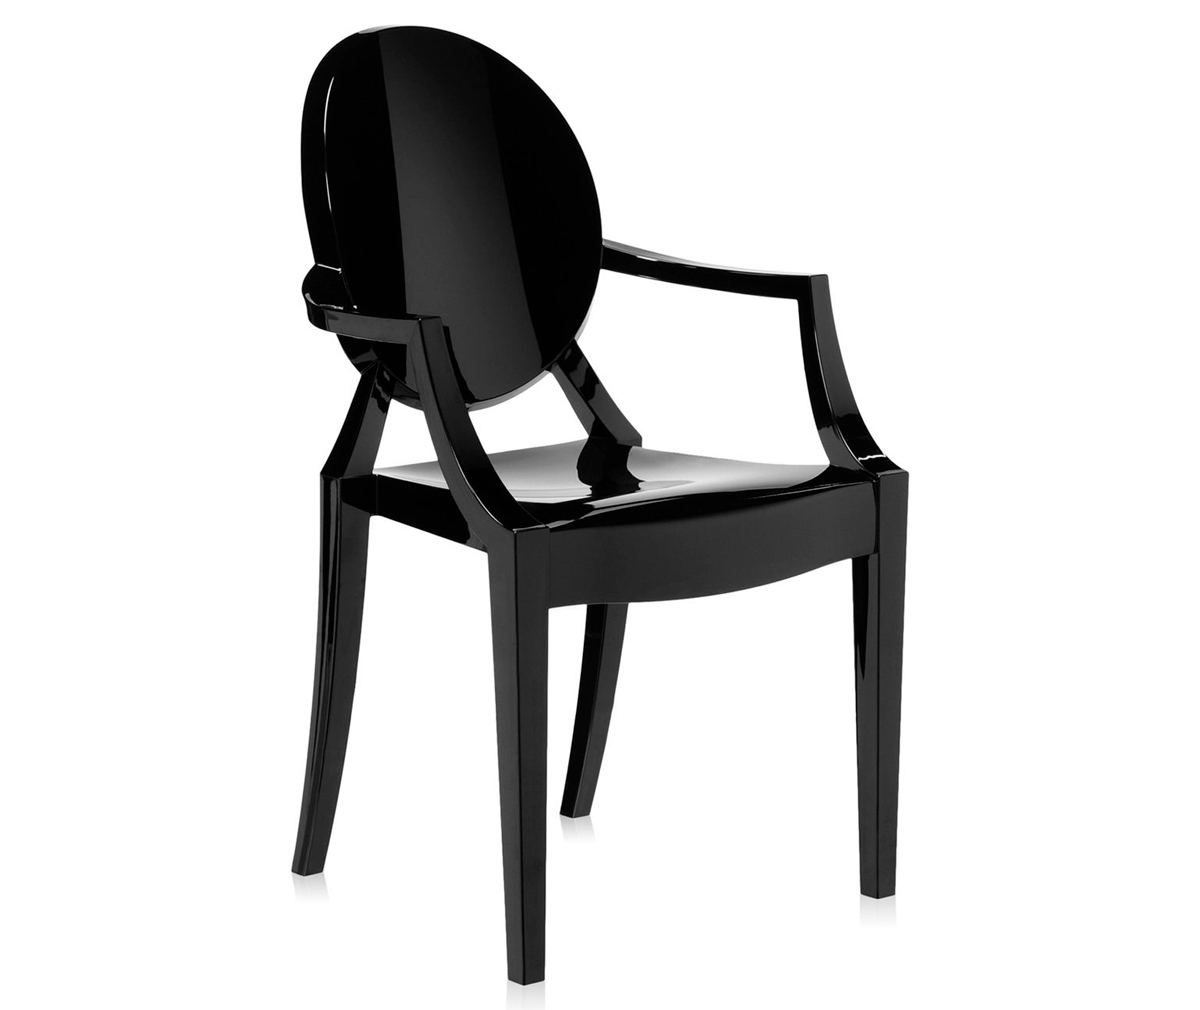 Lou Lou Ghost Children's Chair